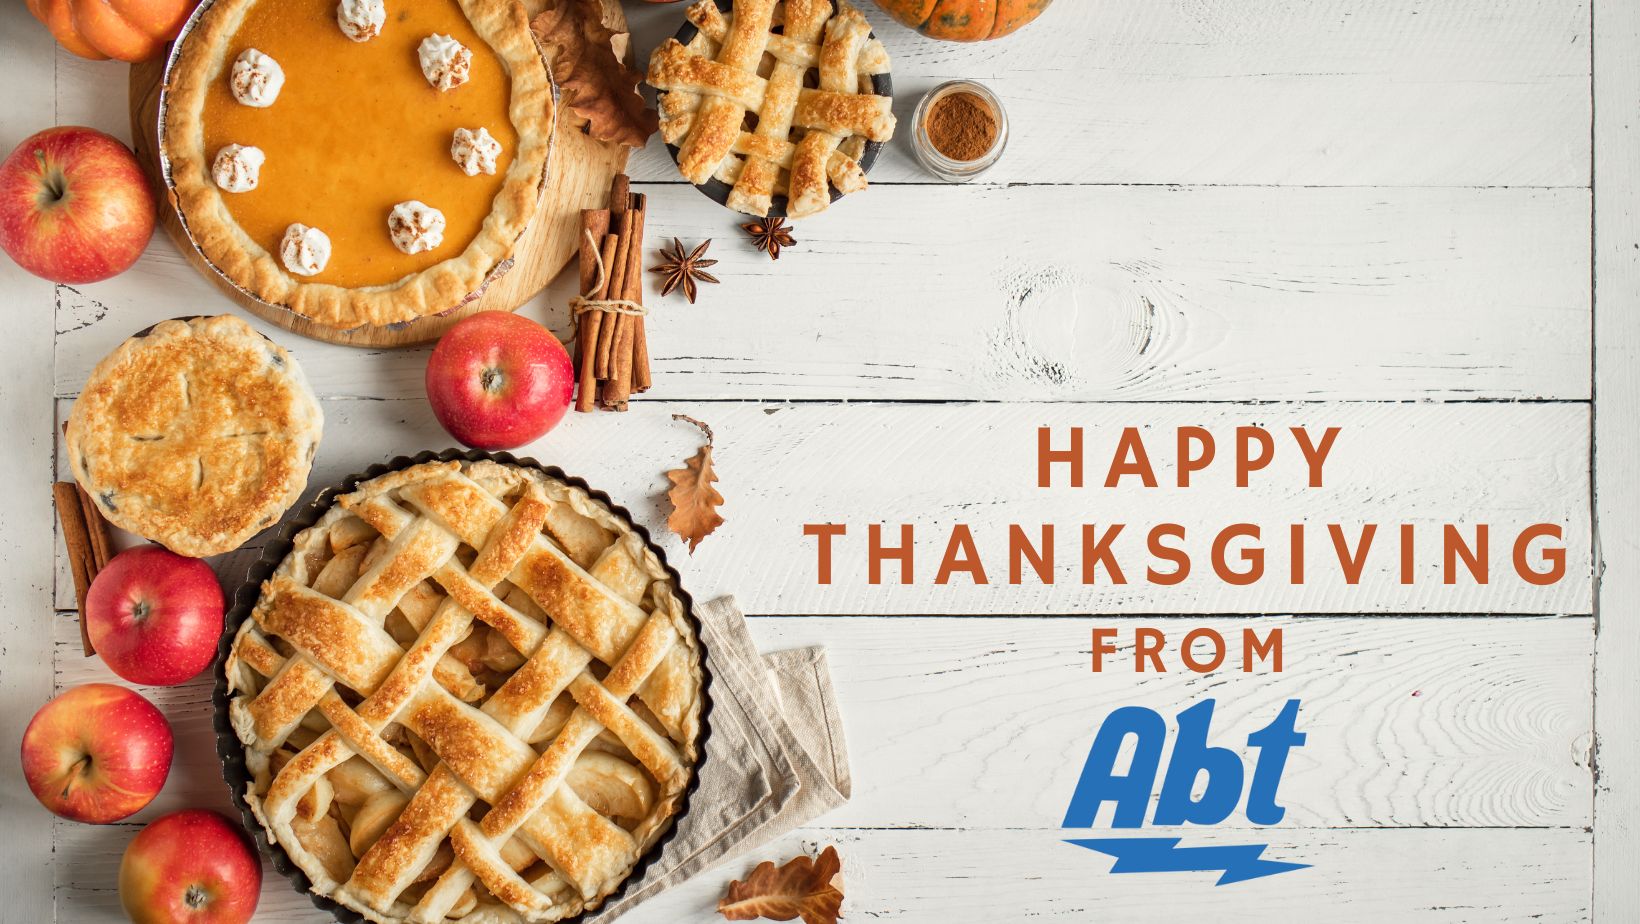 Burnt orange text reads "happy Thanksgiving from" with the blue Abt logo underneath. Next to the text are several pies, apples and cinnamon sticks